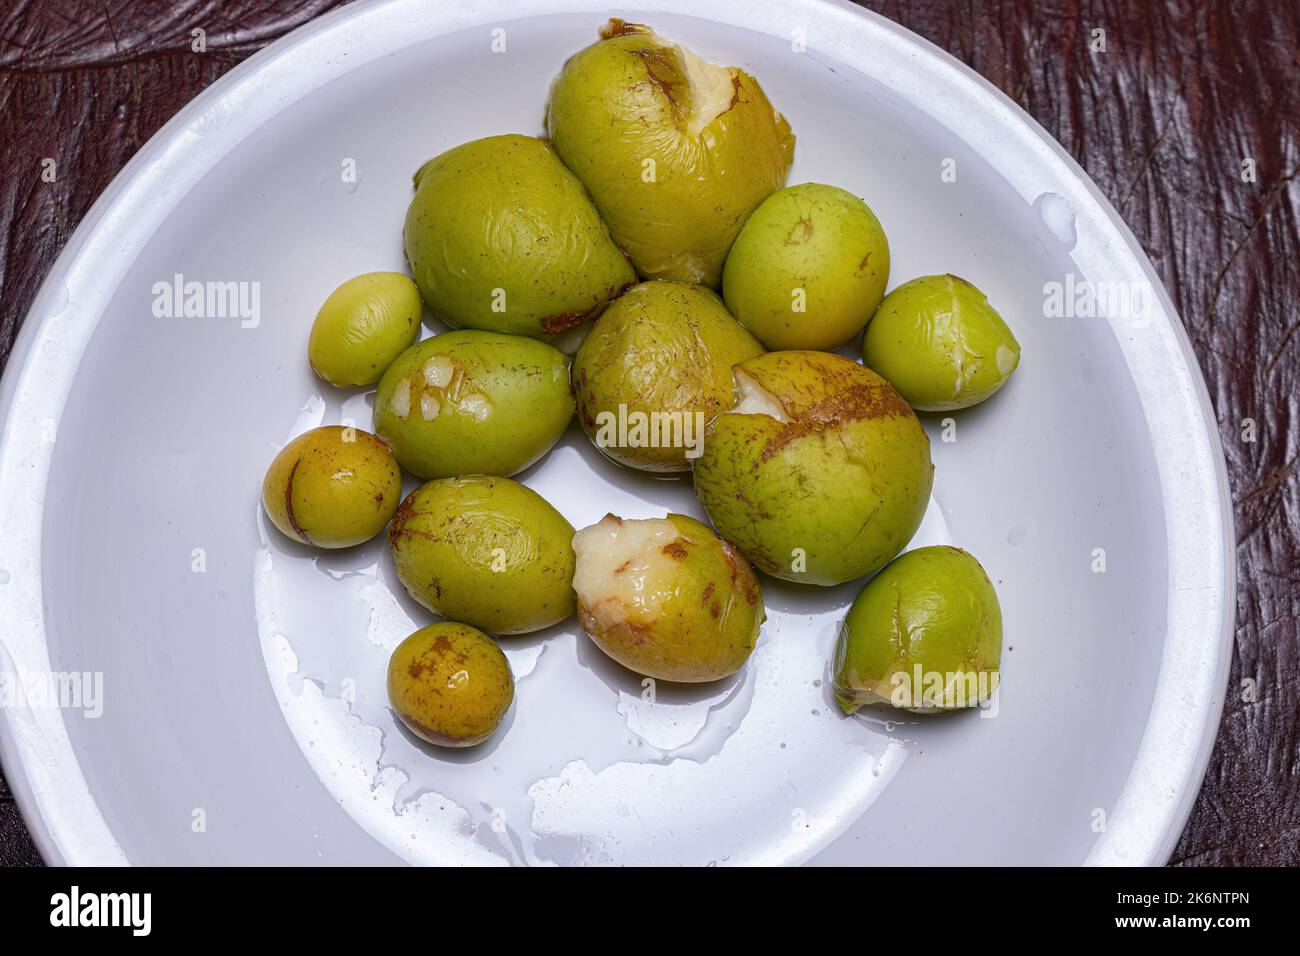 South American fruits known as mangabas of the tree Hancornia speciosa commonly called mangabeira on a white plate Stock Photo